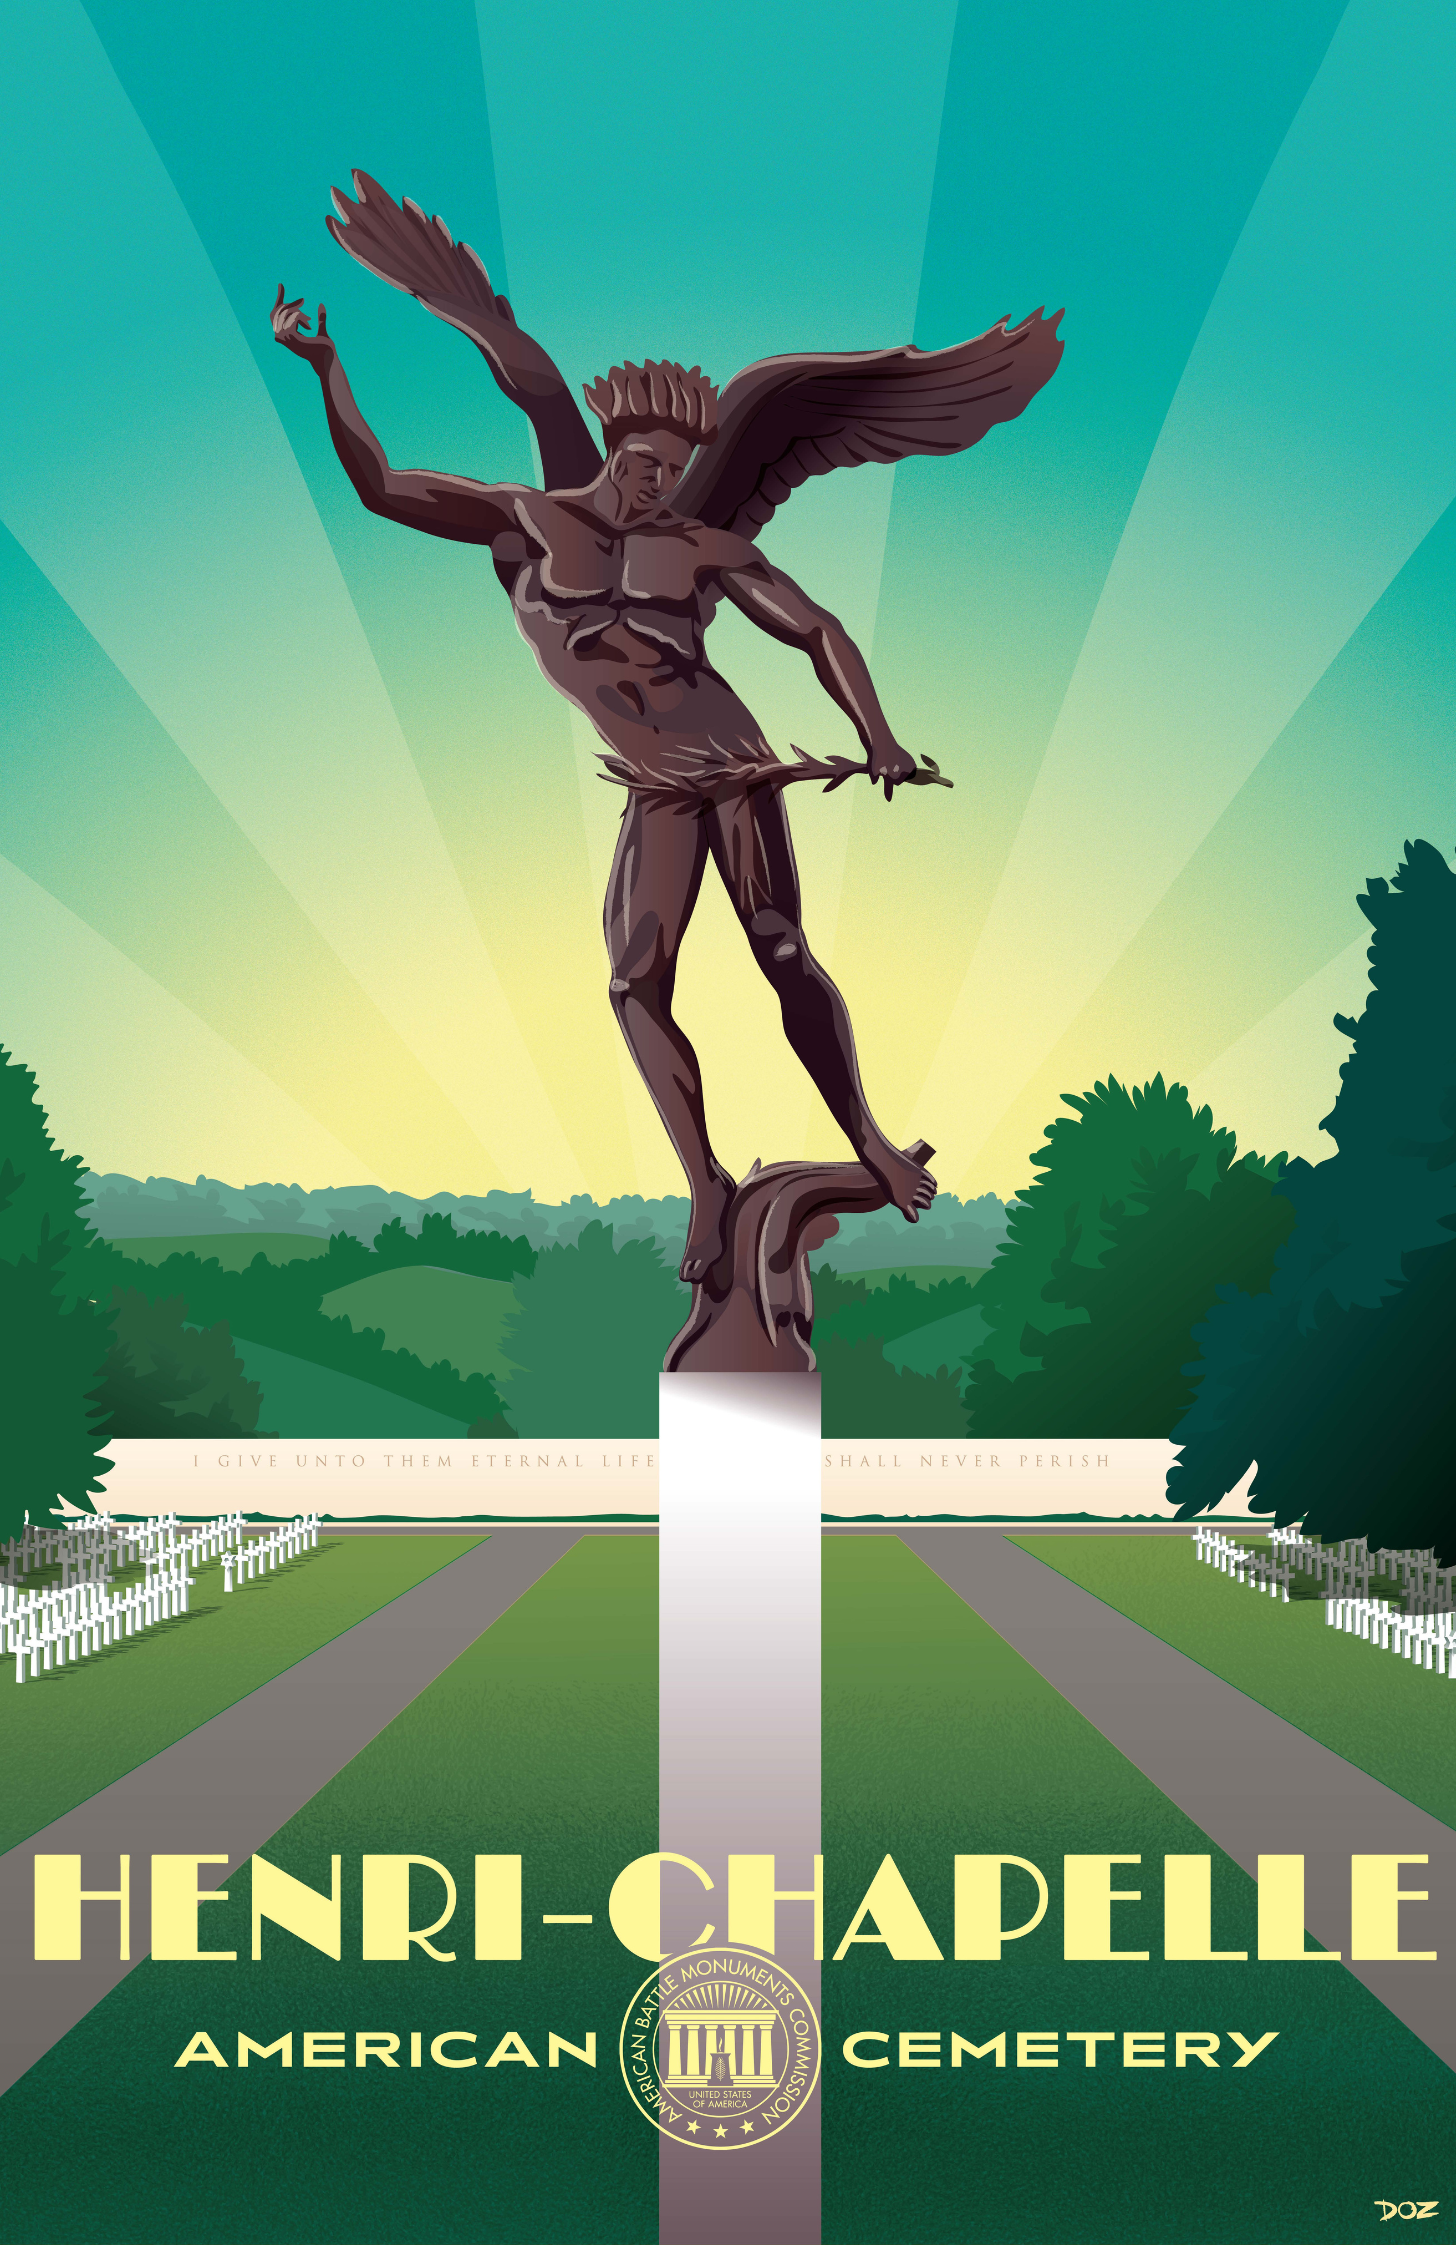 Vintage poster of Henri-Chapelle American Cemetery